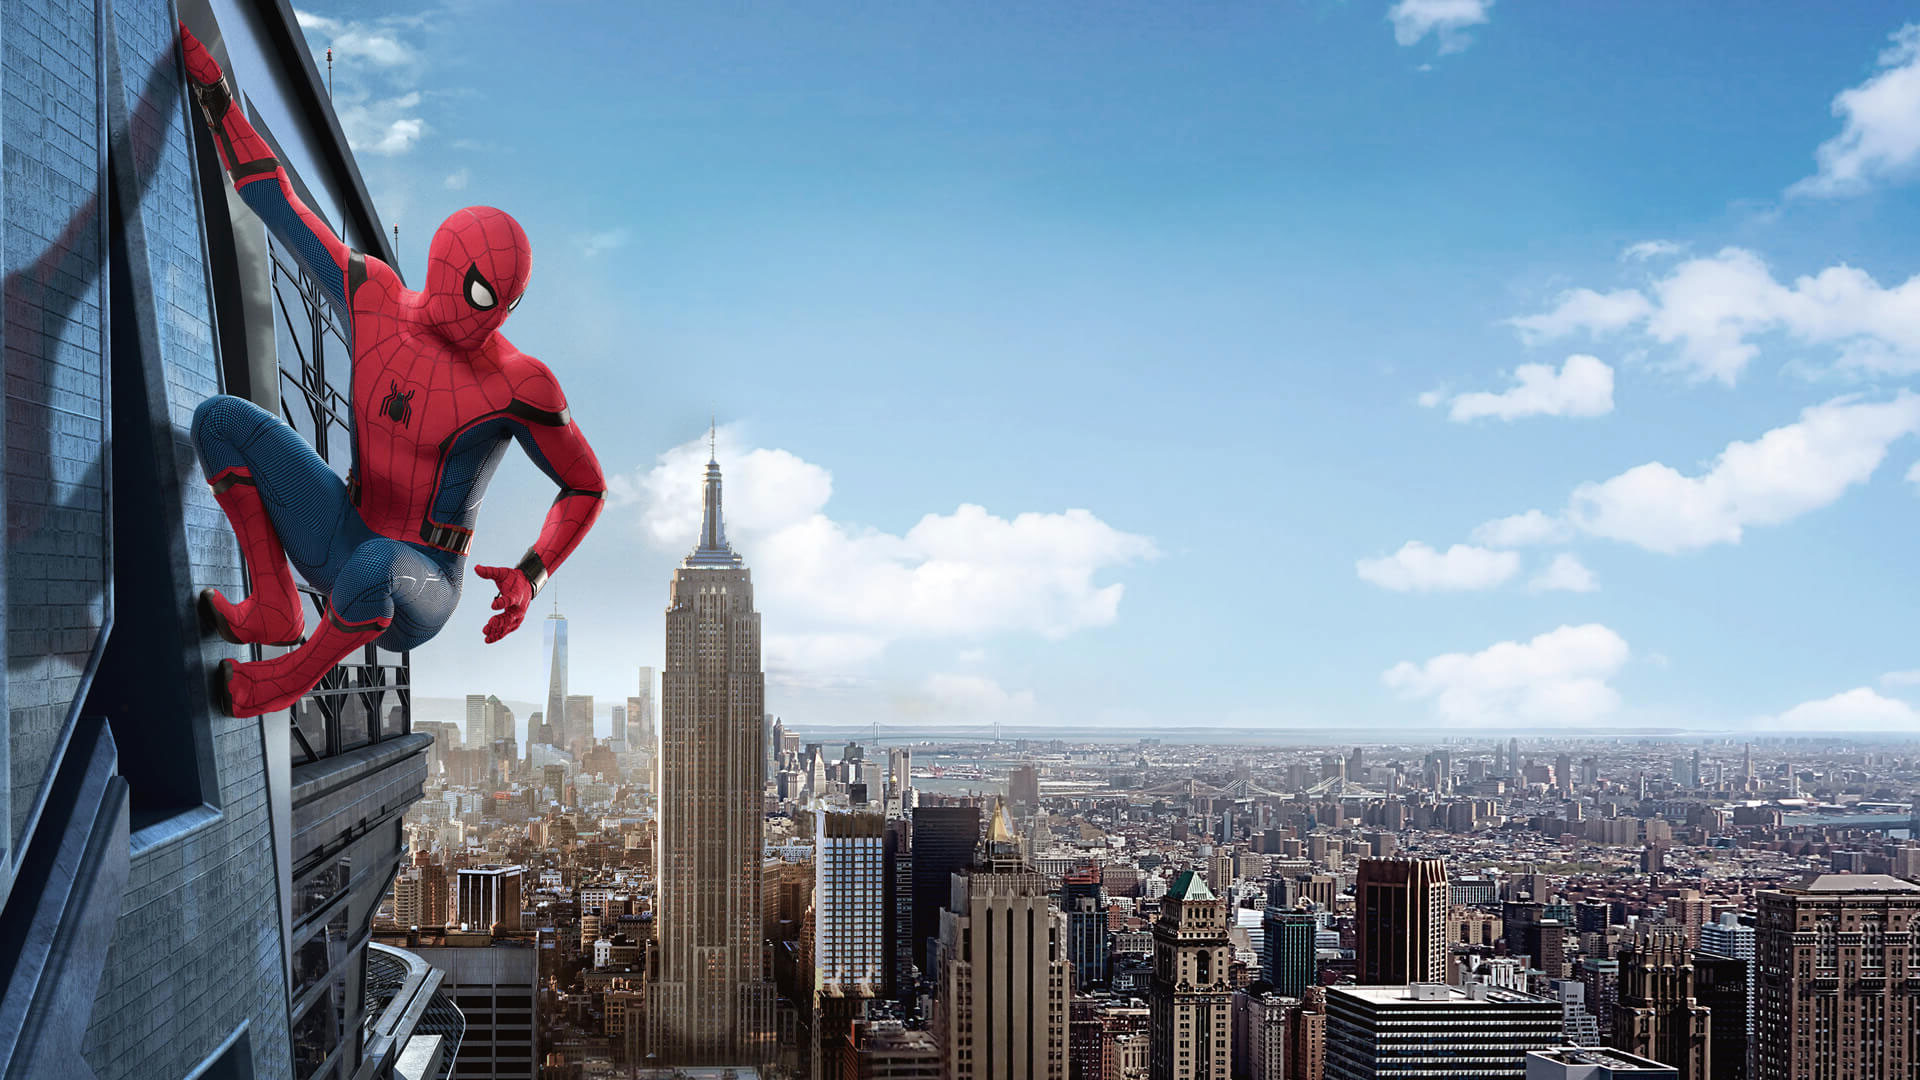 1920x1080 movie home wallpaper Spider-Man: Homecoming (2017) Movie Desktop Wallpapers  HD Quality